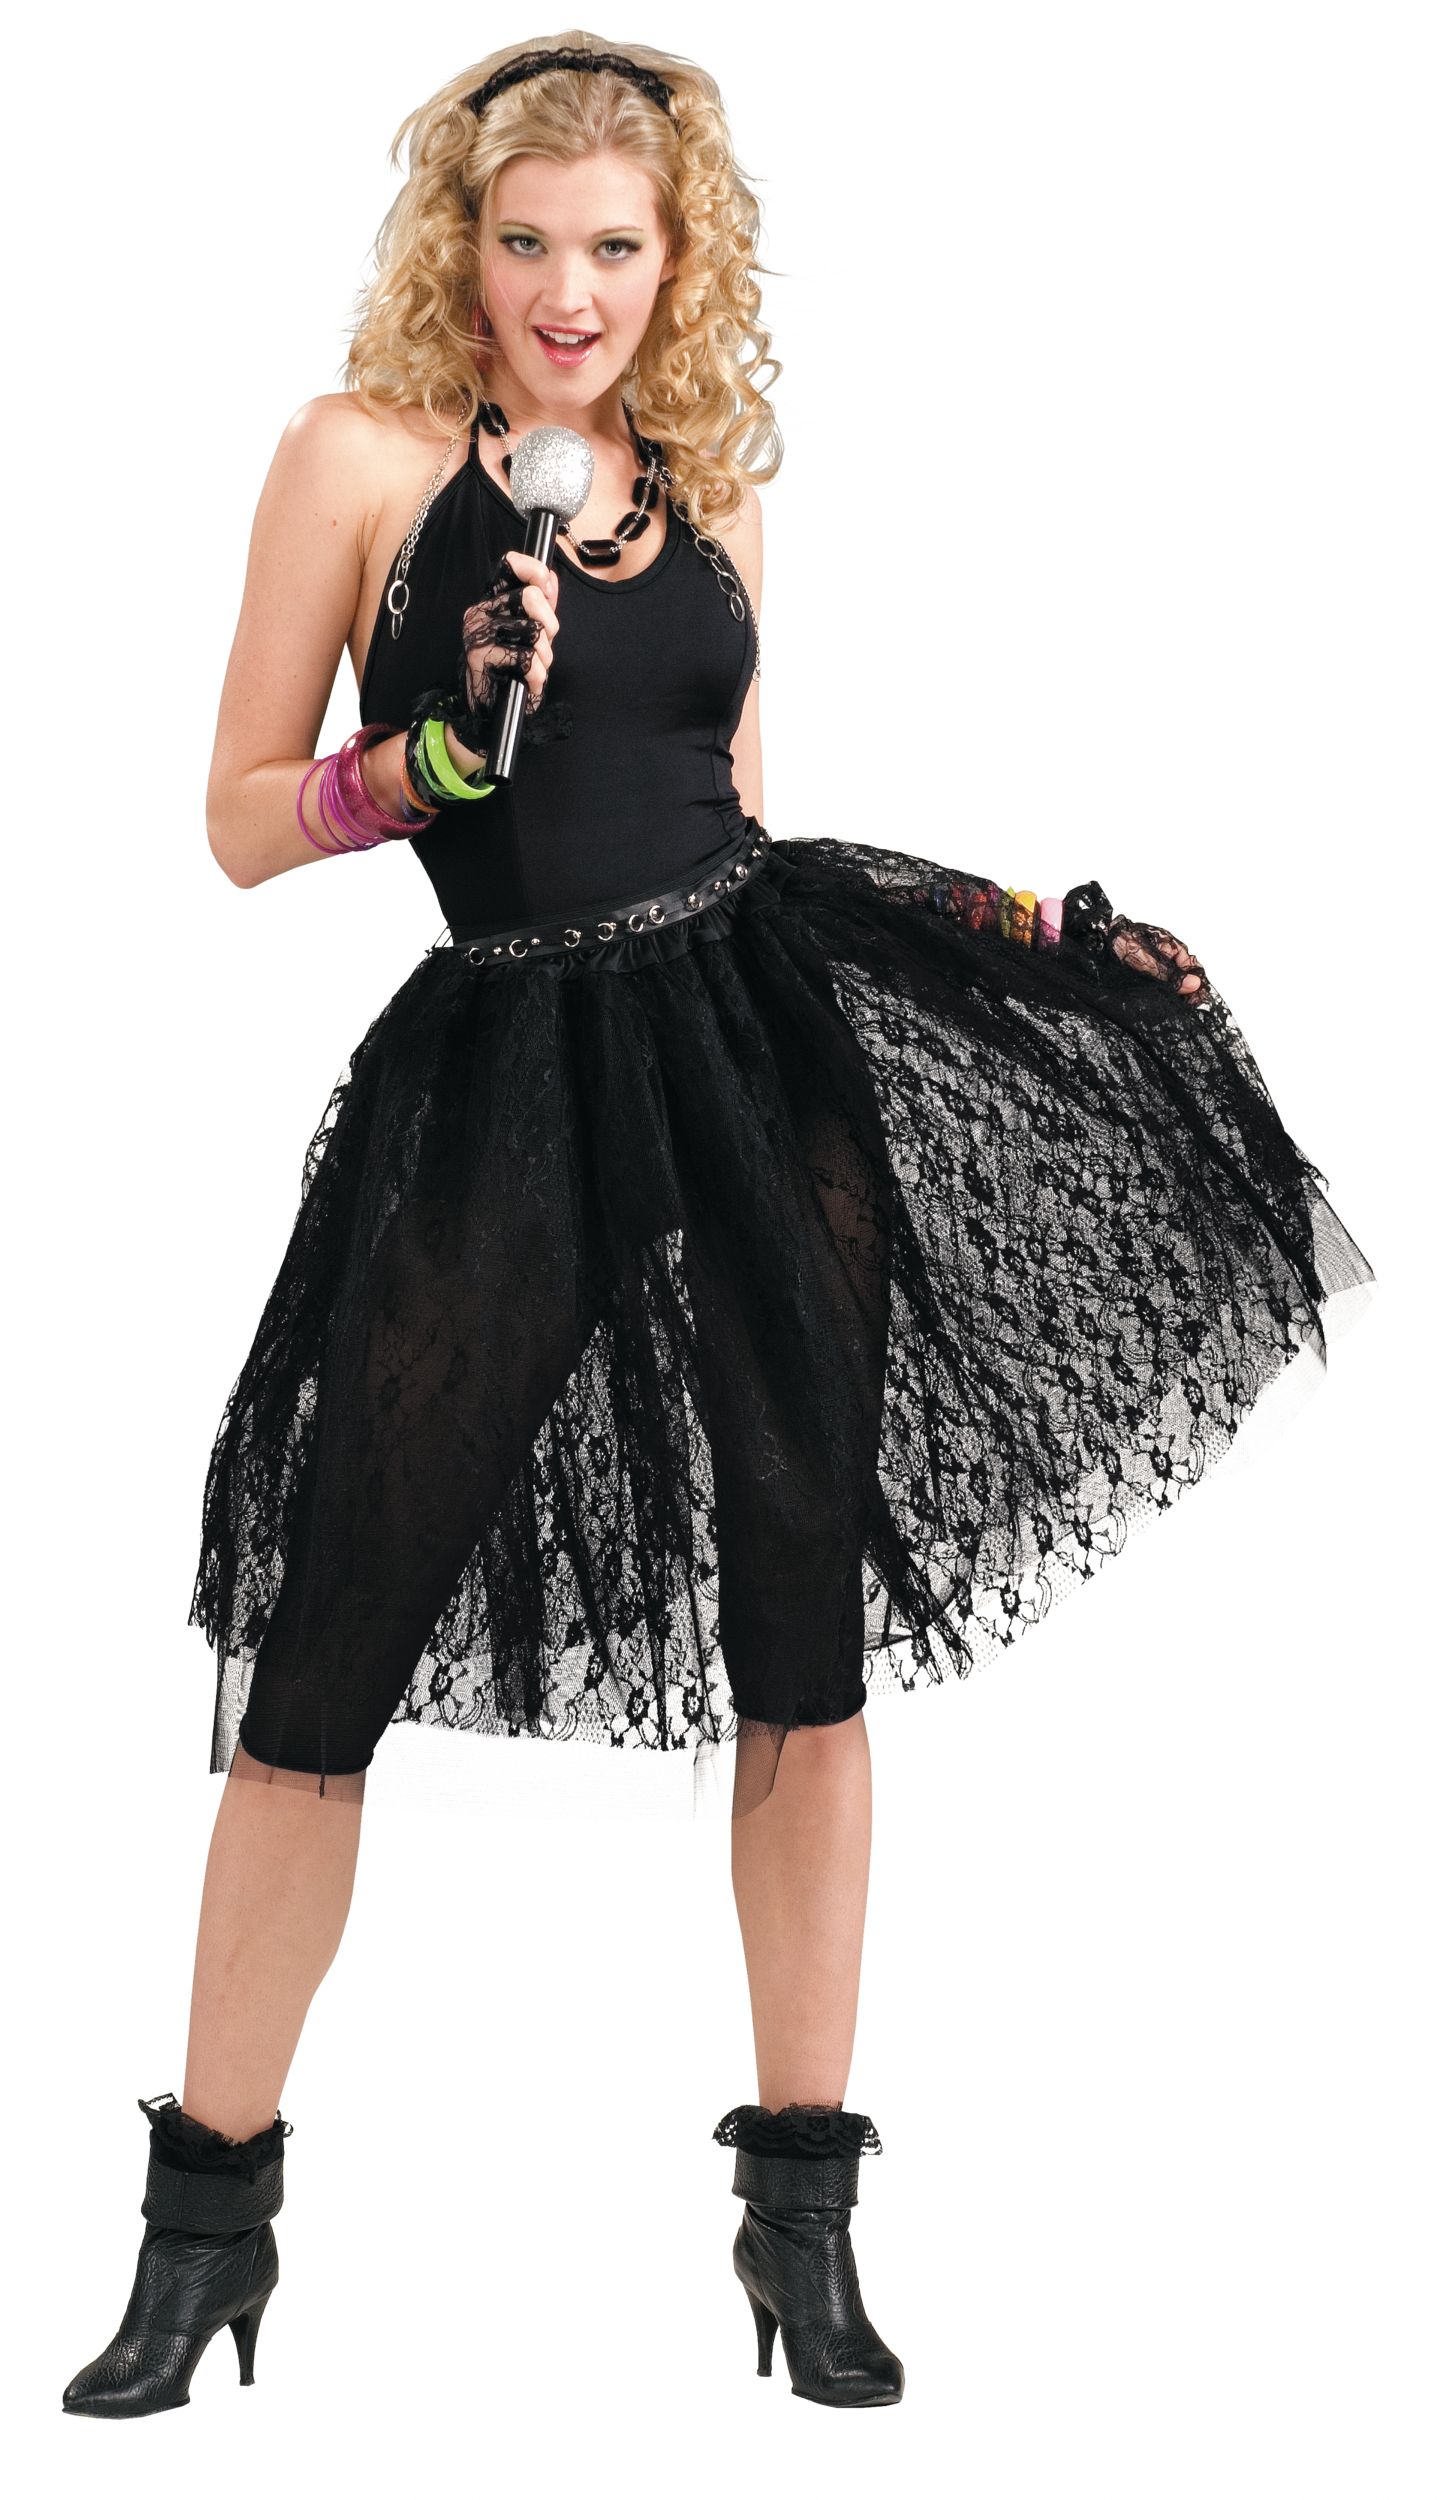 Adult 1980s Lace Tulle Pop Skirt, Black, One Size, Wearable